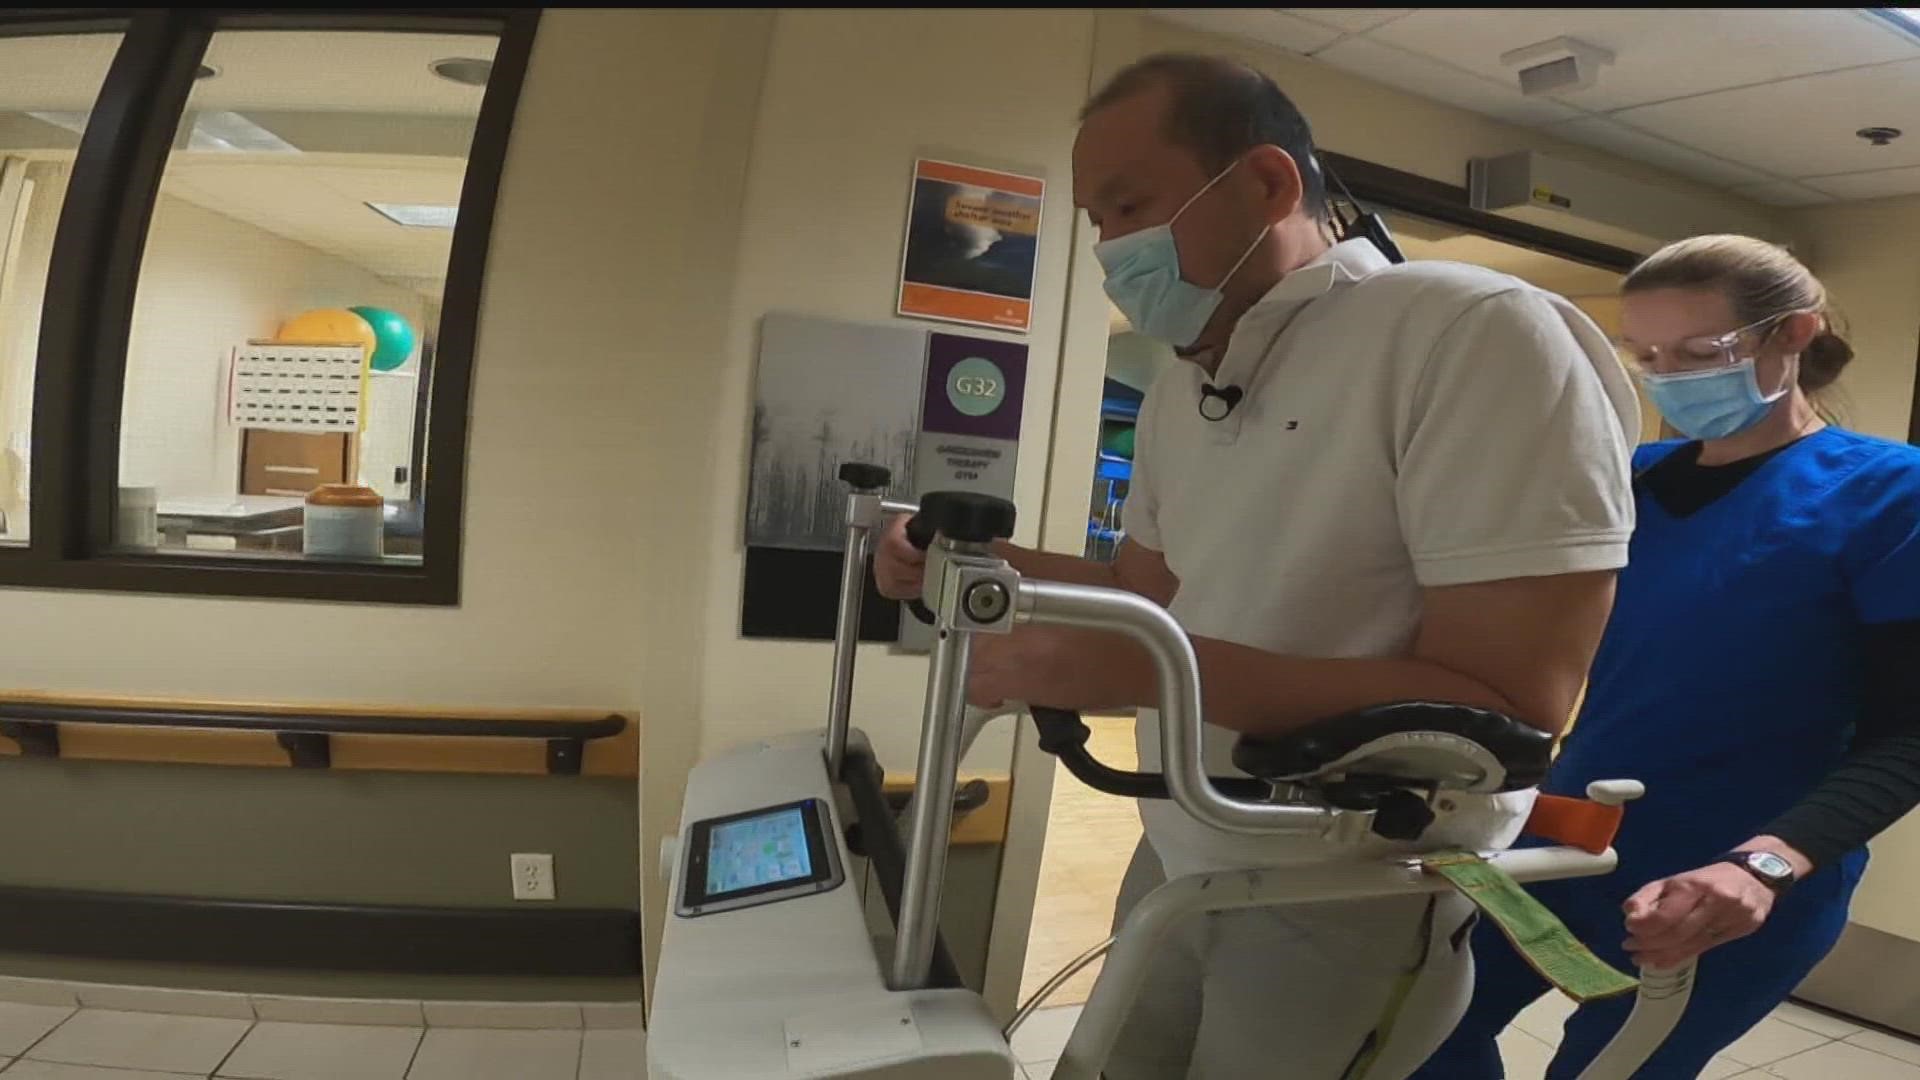 A St. Paul company is using technology from NASA space suits to help patients here in the Twin Cities.